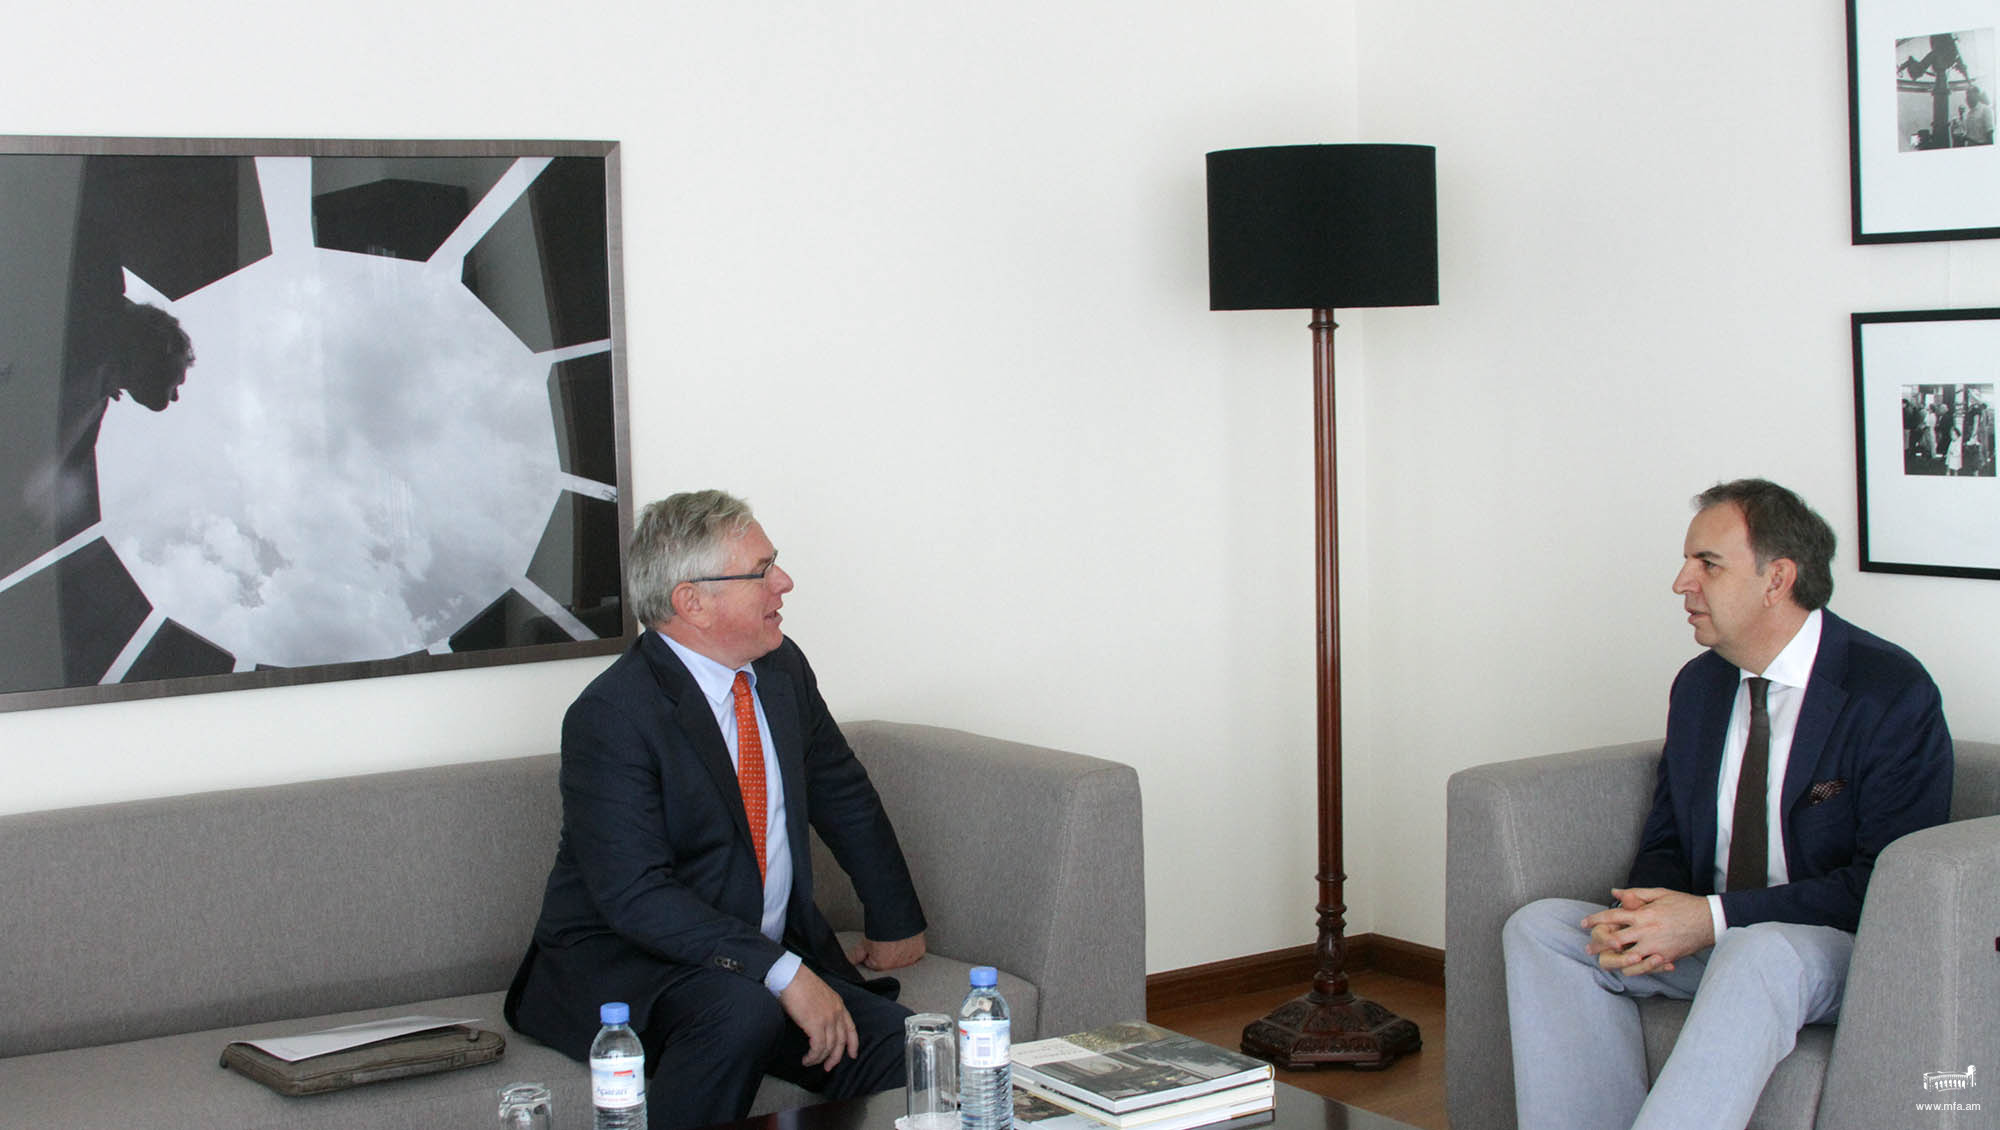 The newly appointed Ambassador of Denmark presented the copies of credentials to the Deputy Foreign Minister